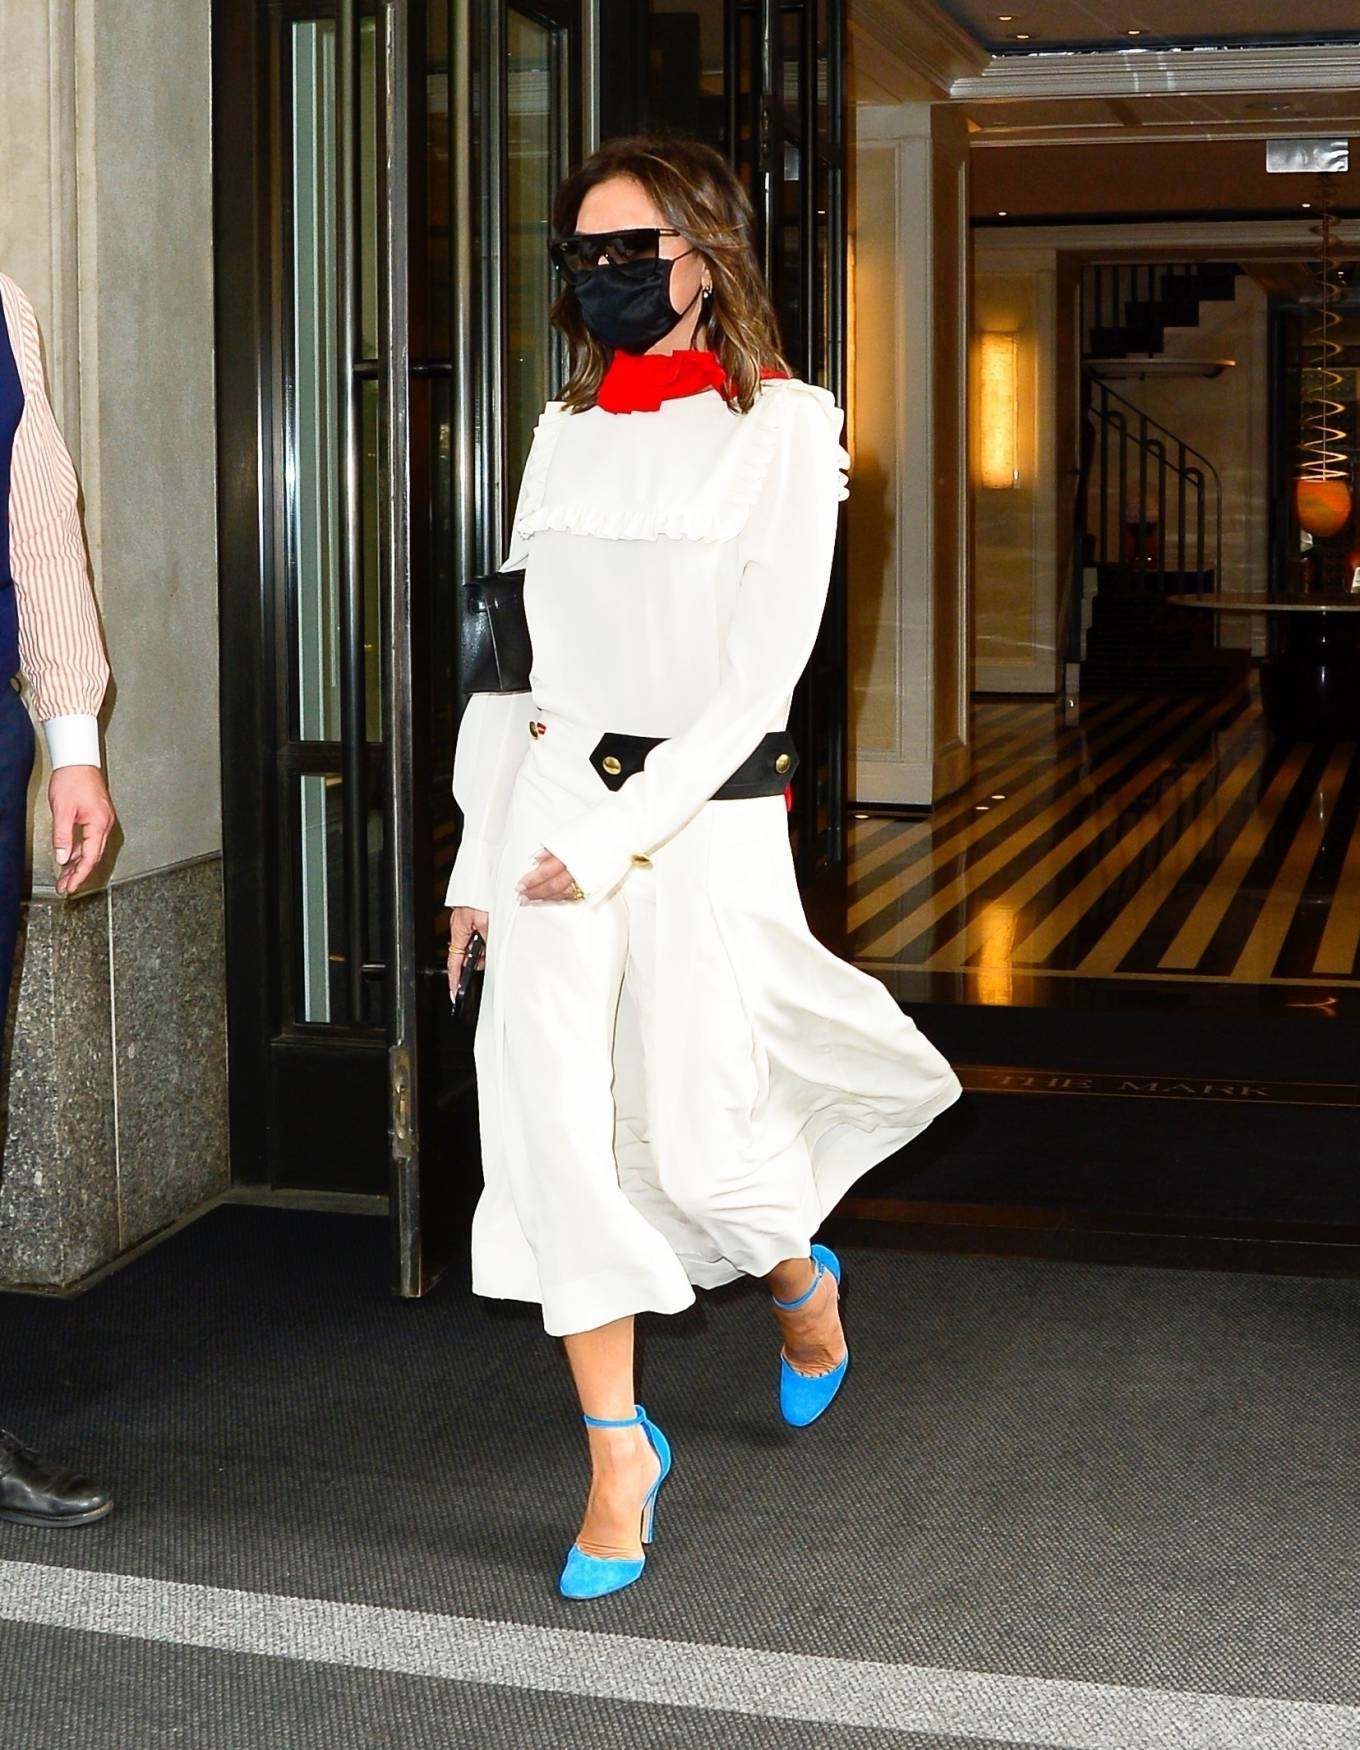 Victoria Beckham 2021 : Victoria Beckham – In white maxi dress steps out in New York-01